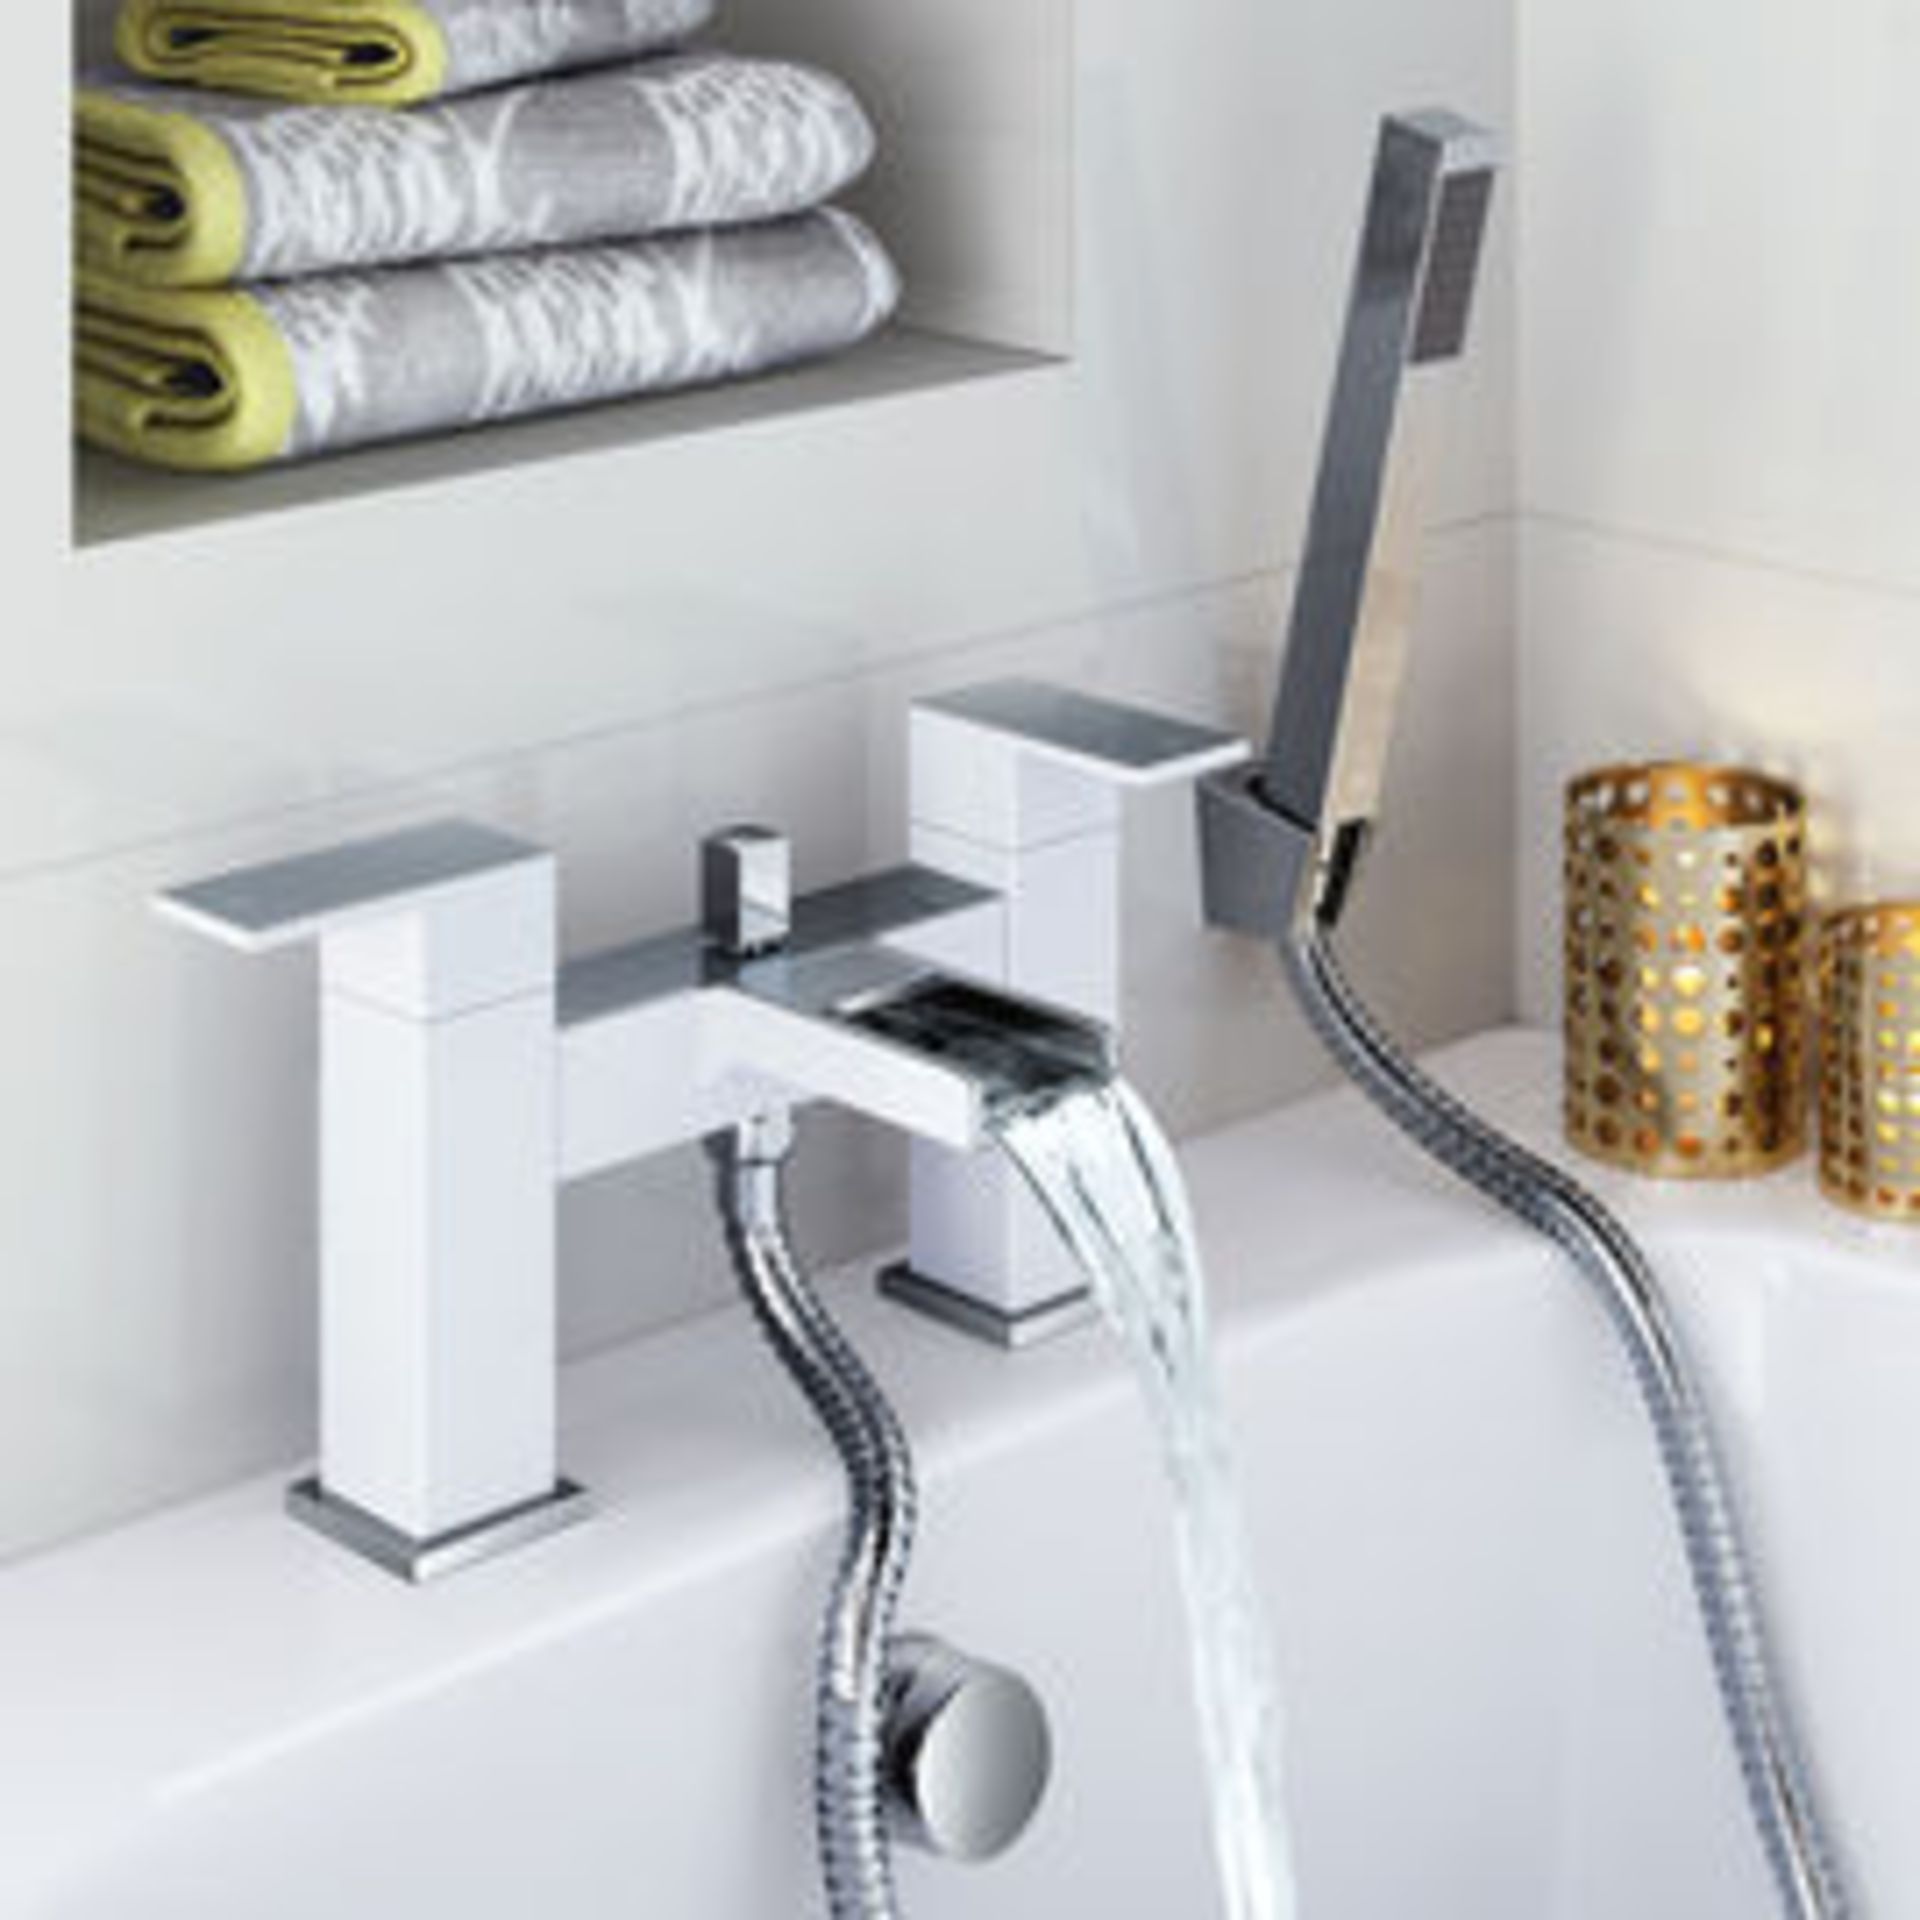 (M1050) White Niagra II Waterfall Bath Mixer Tap with Handheld Shower 1/4 turn solid brass val...